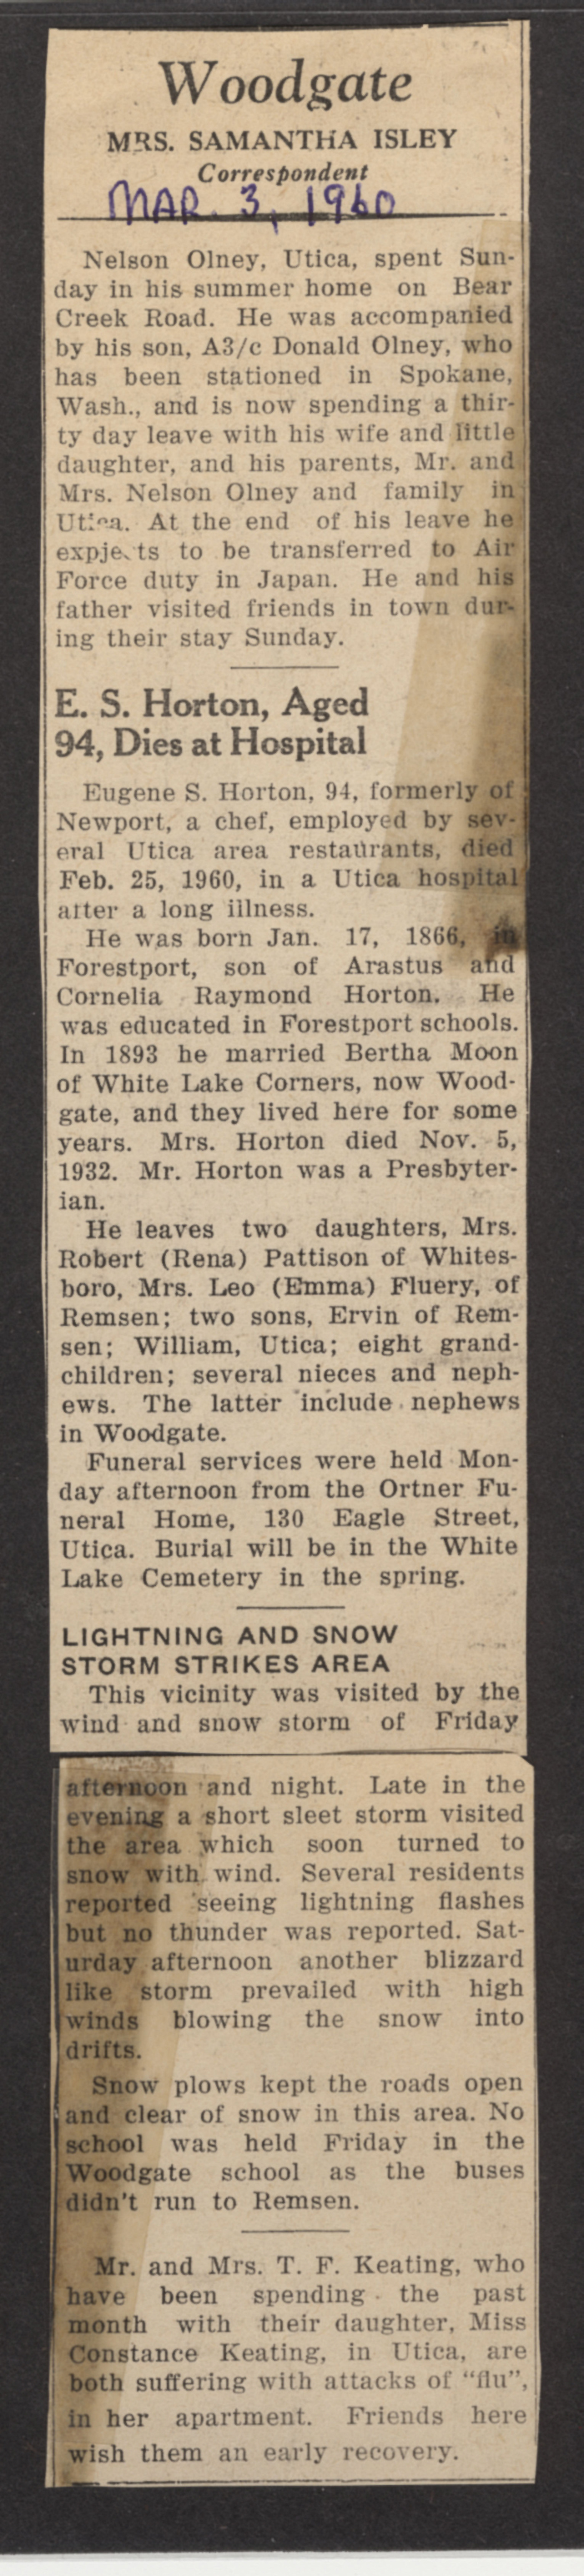 woodgate news boonville herald march3 1960